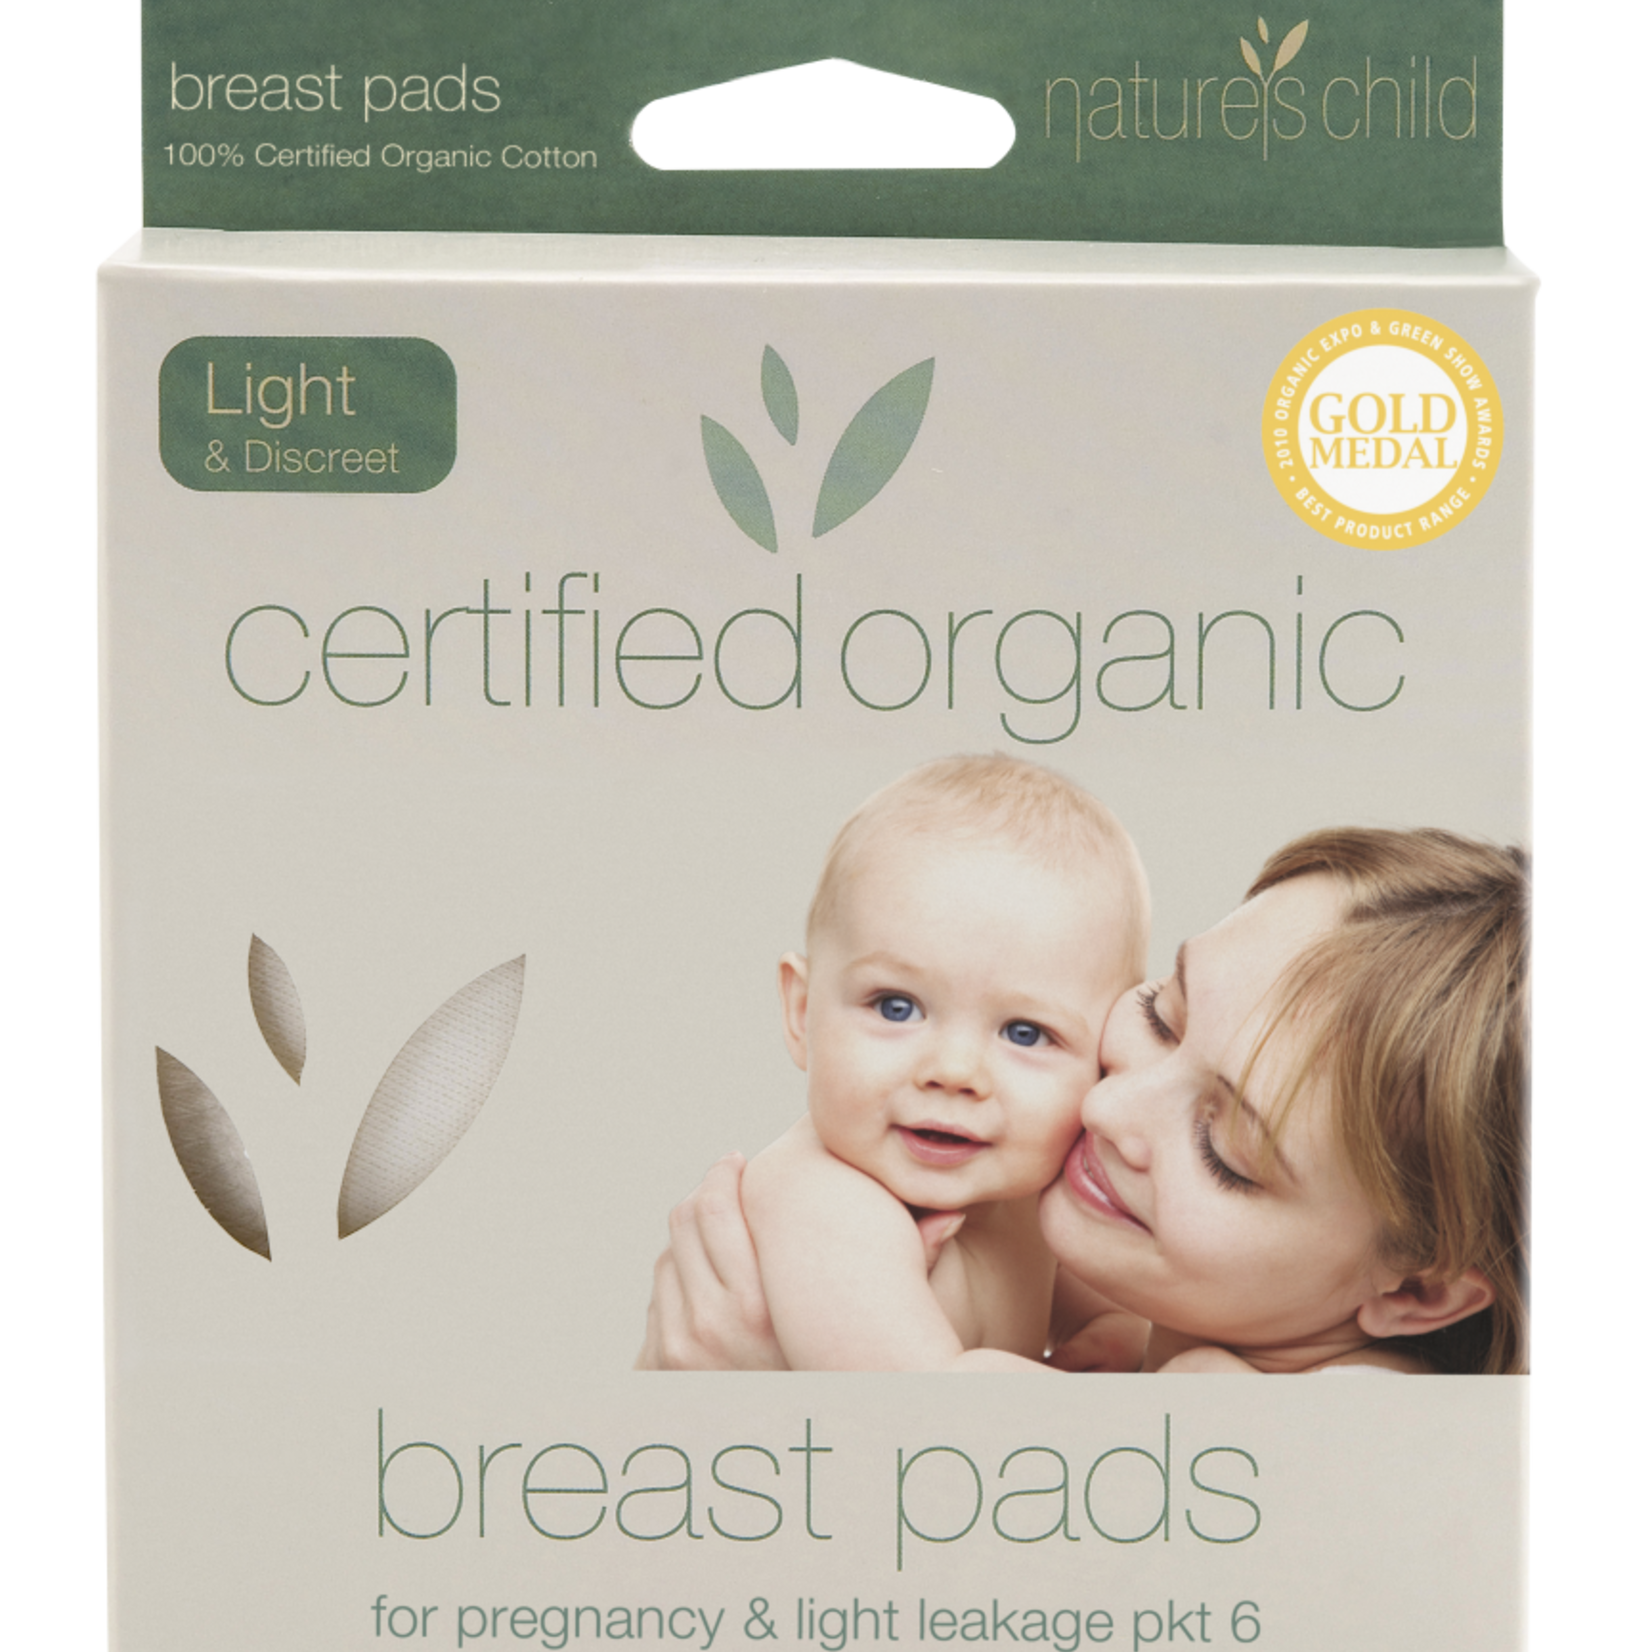 Nature’s child Certified Organic Cotton Breast Pads-6 Pack Light